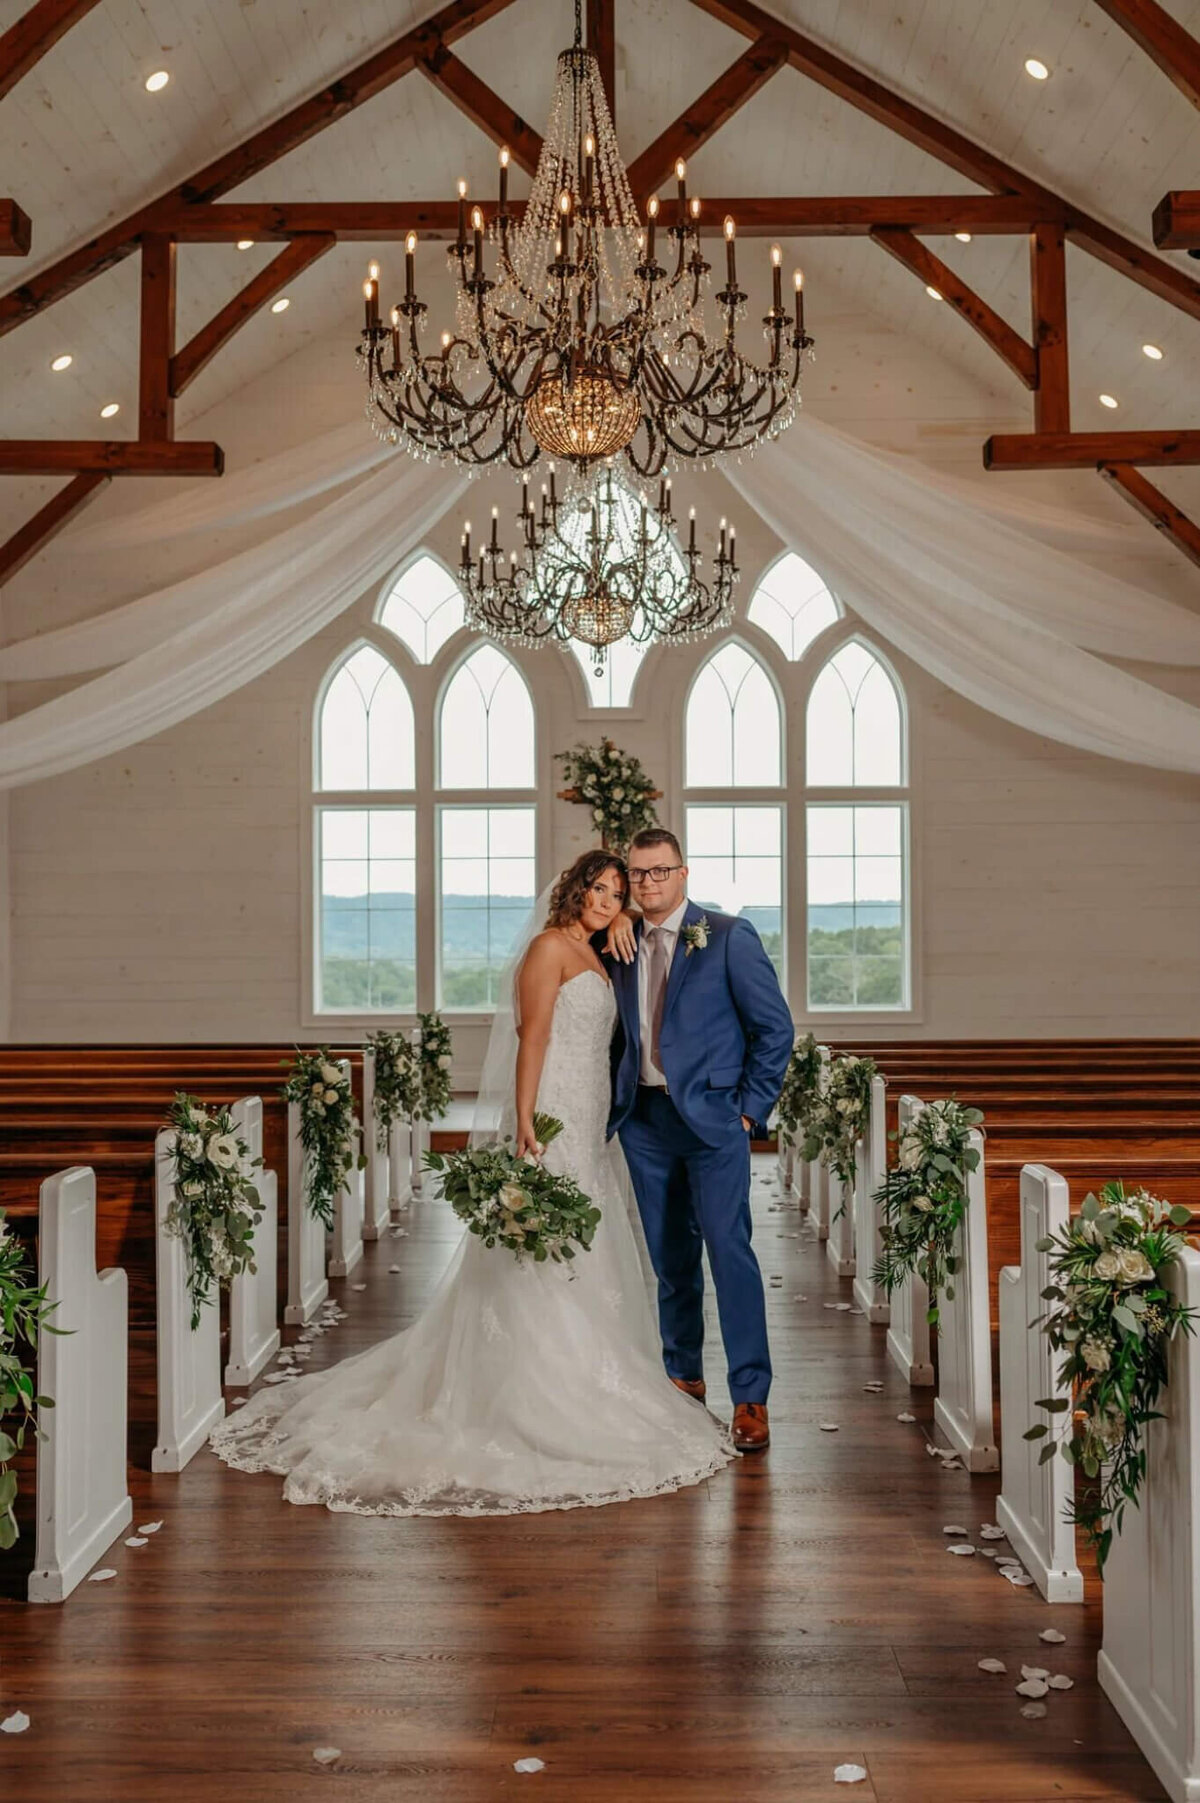 Photo of a bride leaning on her grooms shoulder underneath a chandelier and in between wooden benches of a white wedding chapel